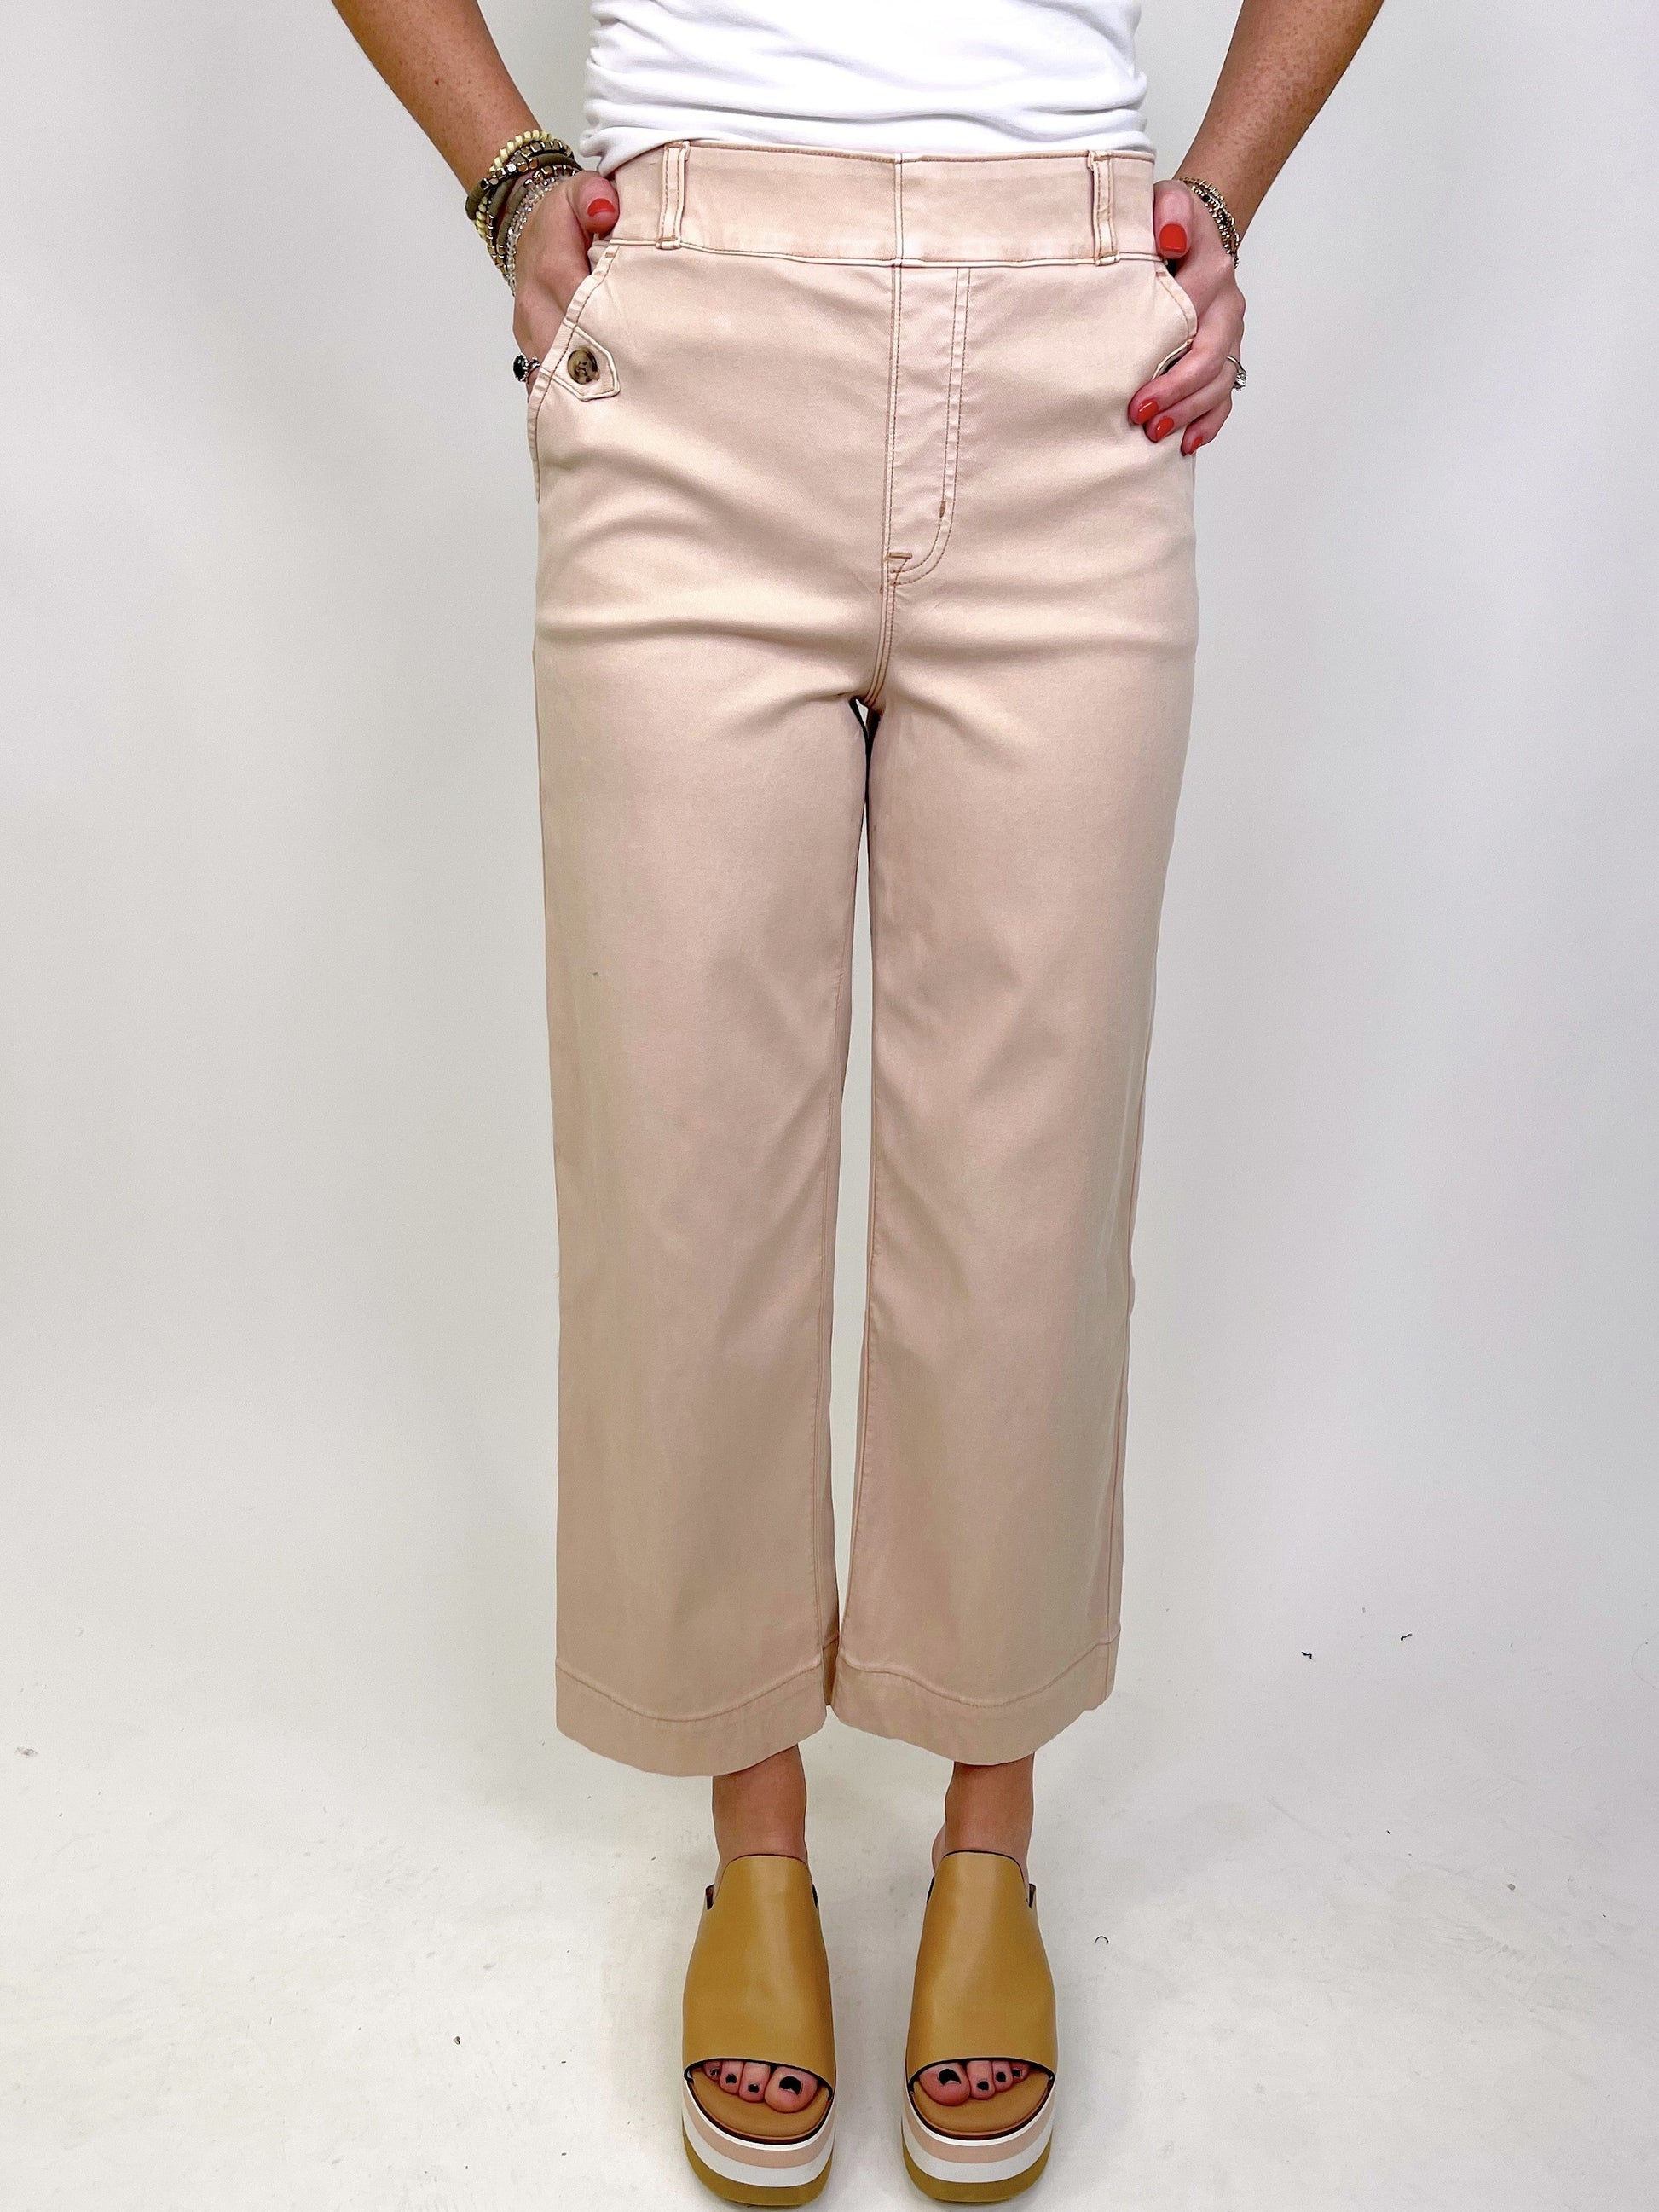 Spanx Twill Cropped Wide Leg Pant-Pull On Pant-Spanx-The Village Shoppe, Women’s Fashion Boutique, Shop Online and In Store - Located in Muscle Shoals, AL.